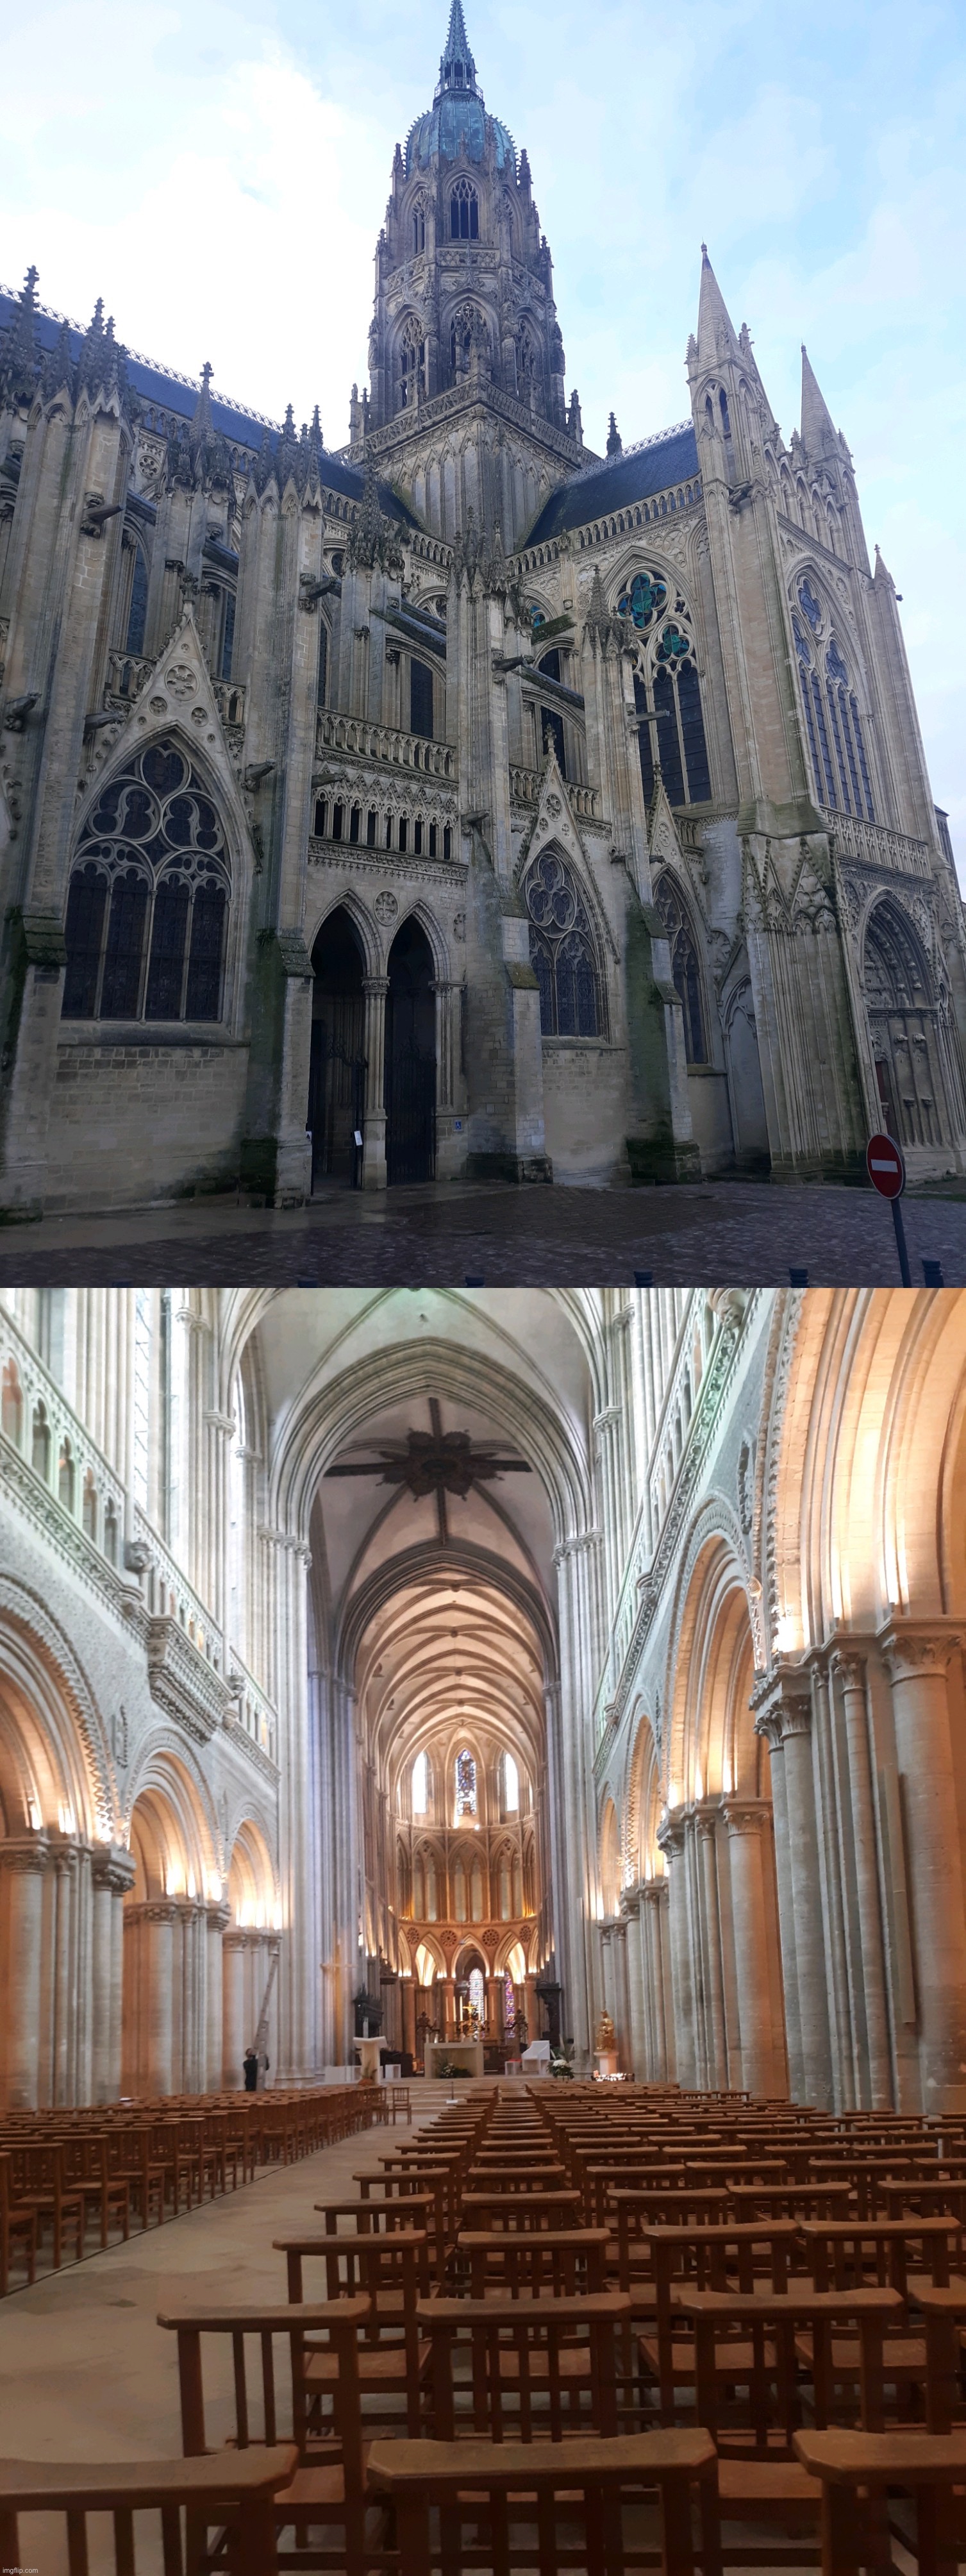 My sister’s pictures from France | image tagged in picture,france,not mine | made w/ Imgflip meme maker